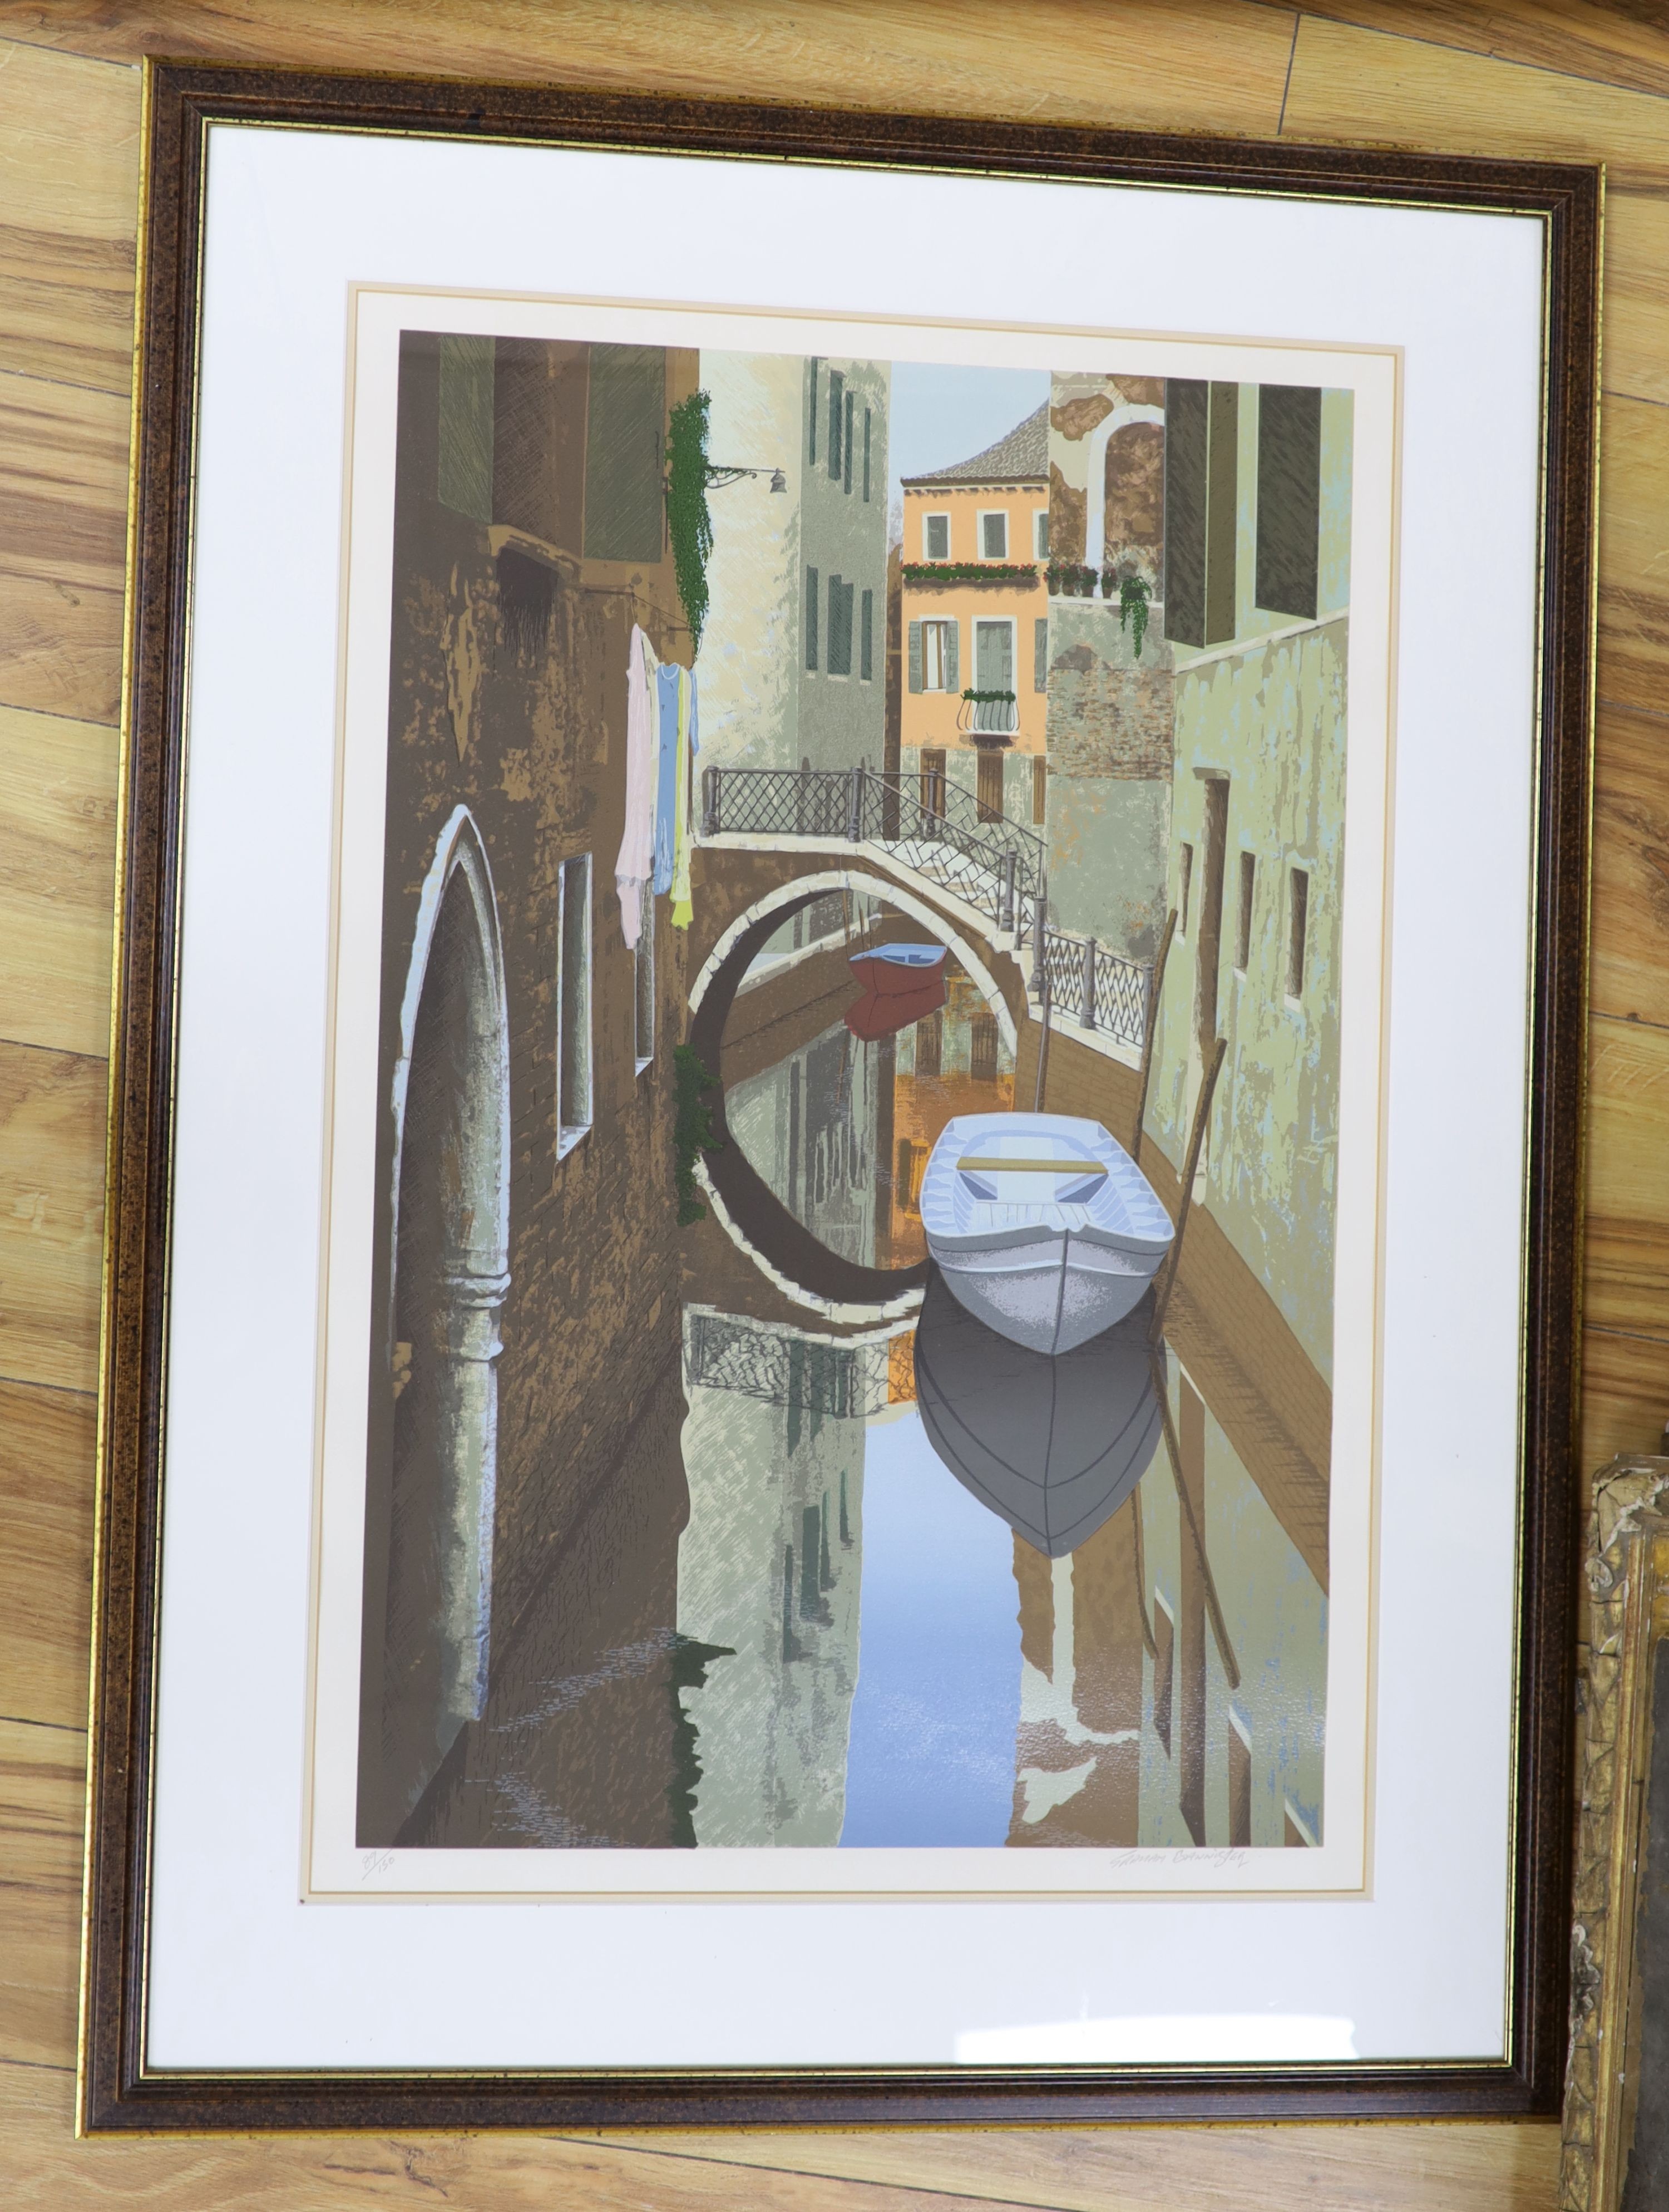 Graham Bannister (b.1954), limited edition print, Venetian canal scene, signed in pencil 89/150, - Image 2 of 3